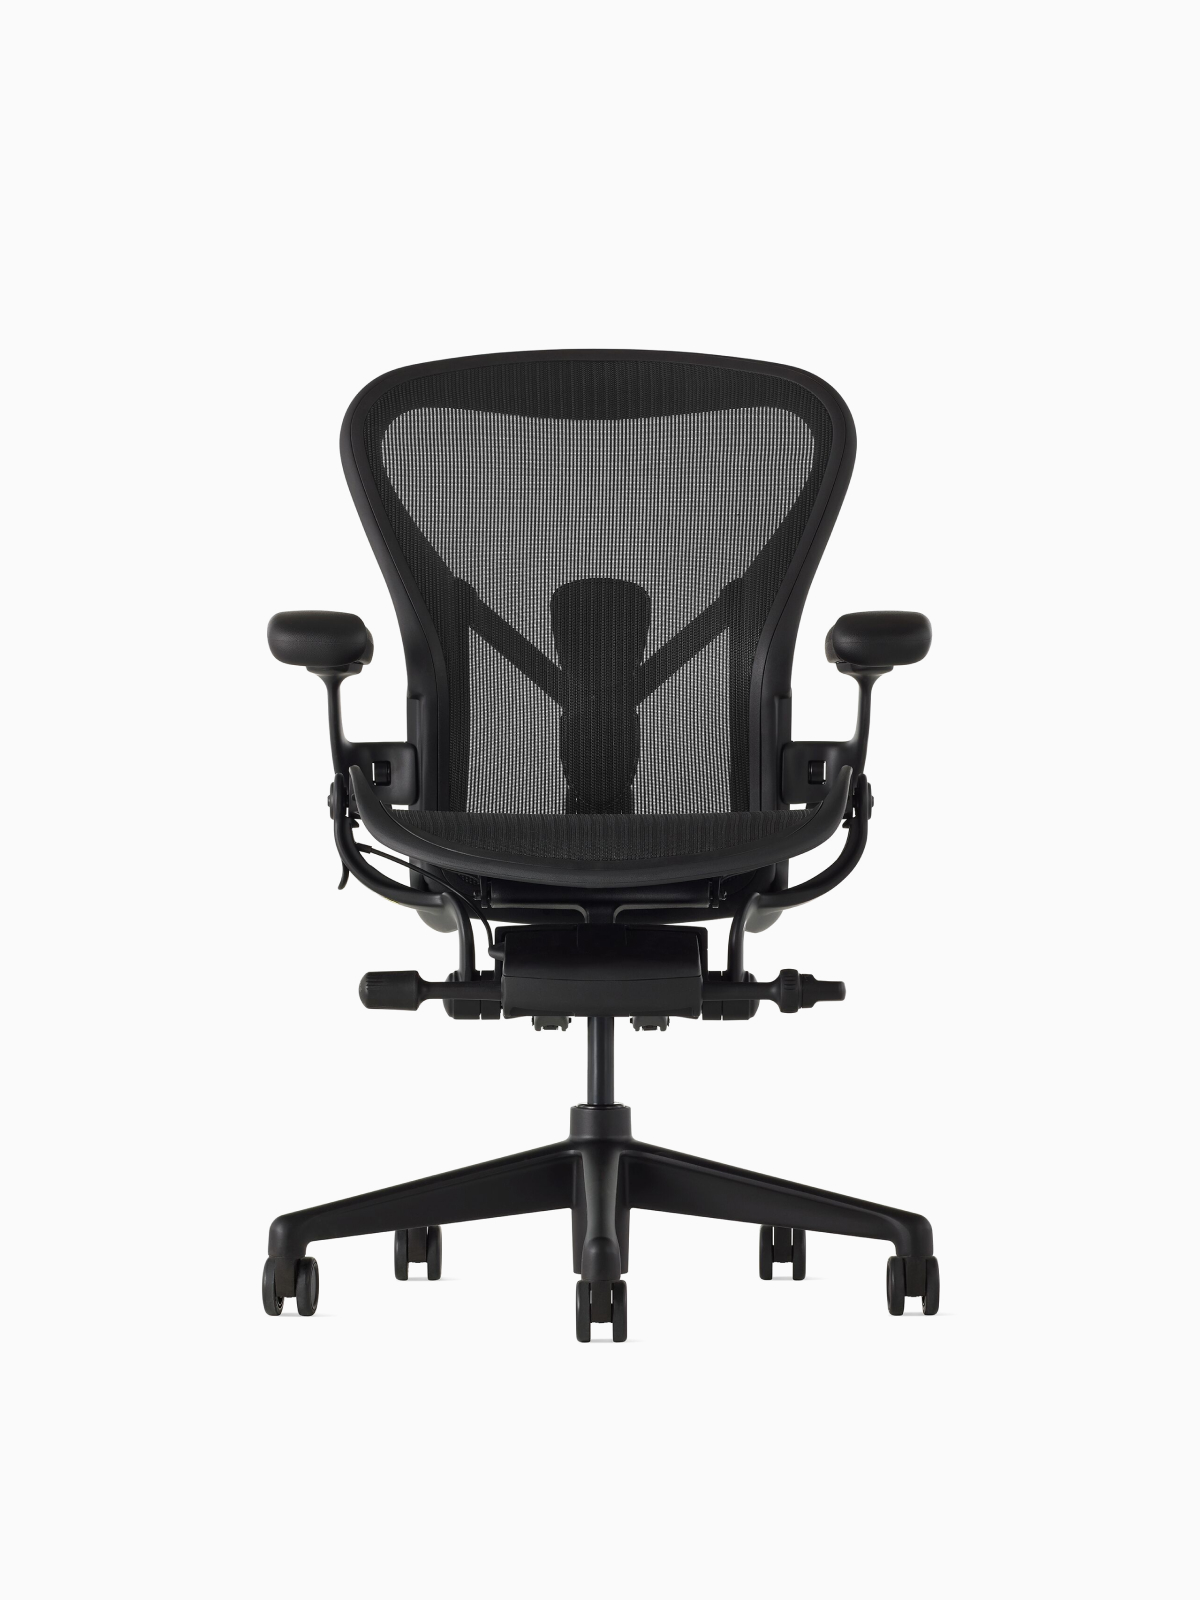 Single Aeron chair on a white background viewed from the front